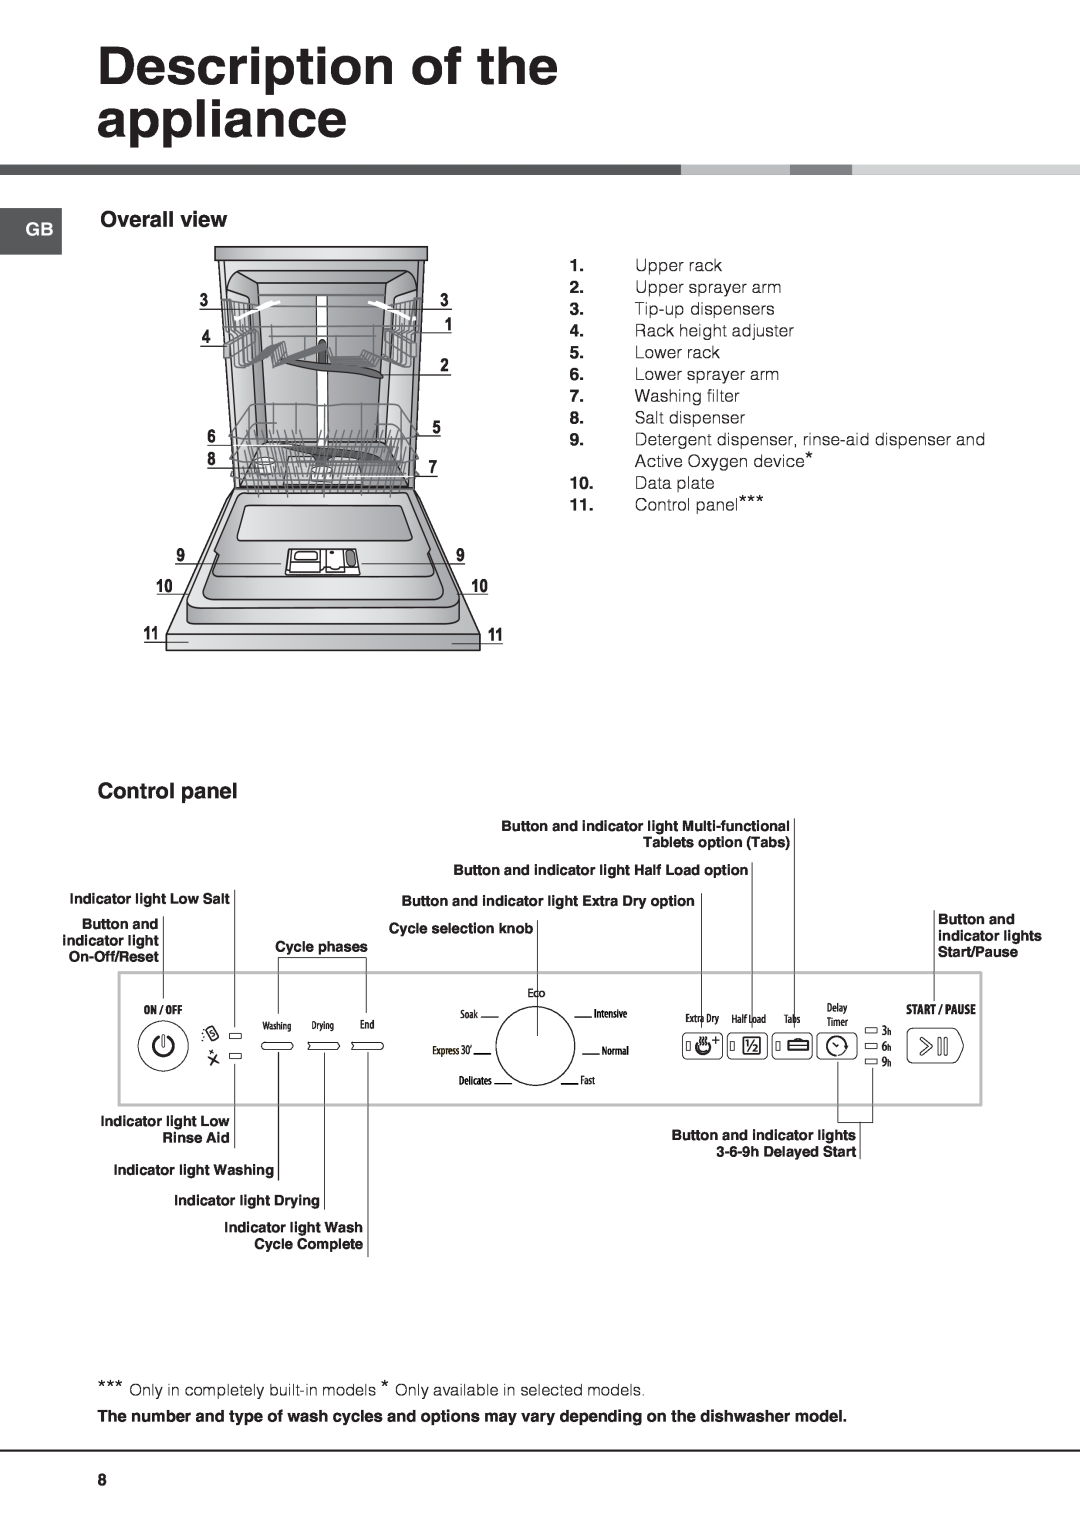 Hotpoint FDFL 11010 manual Description of the appliance, Overall view, Control panel 